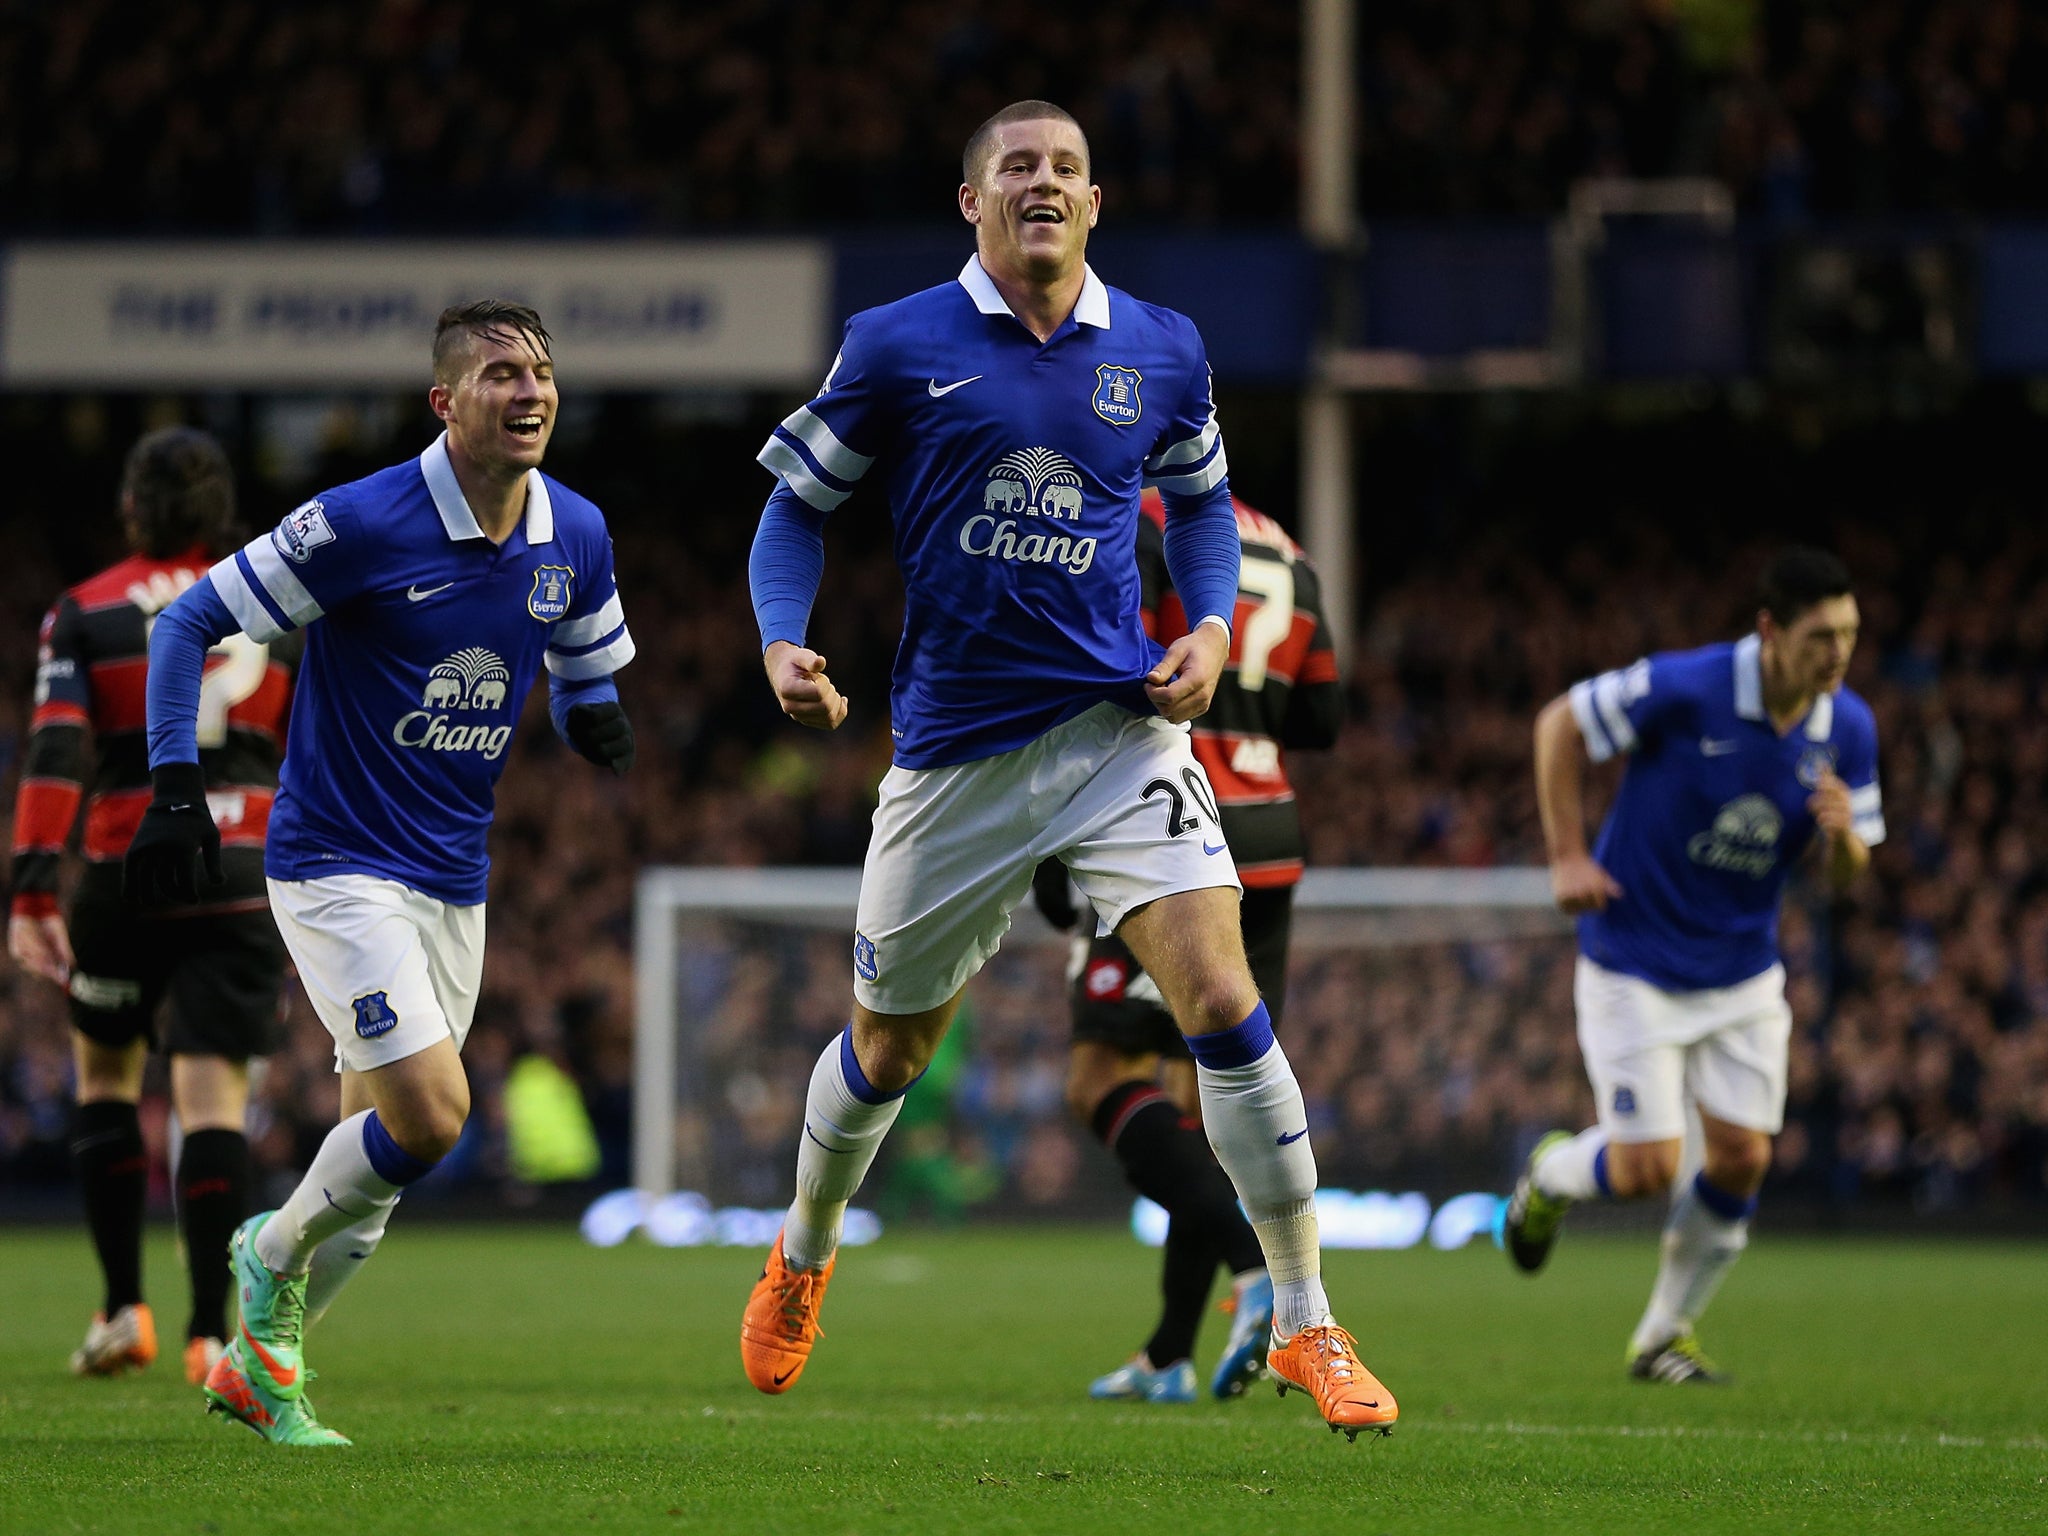 Ross Barkley has suffered a possible broken toe after missing Everton's 2-0 win over Norwich